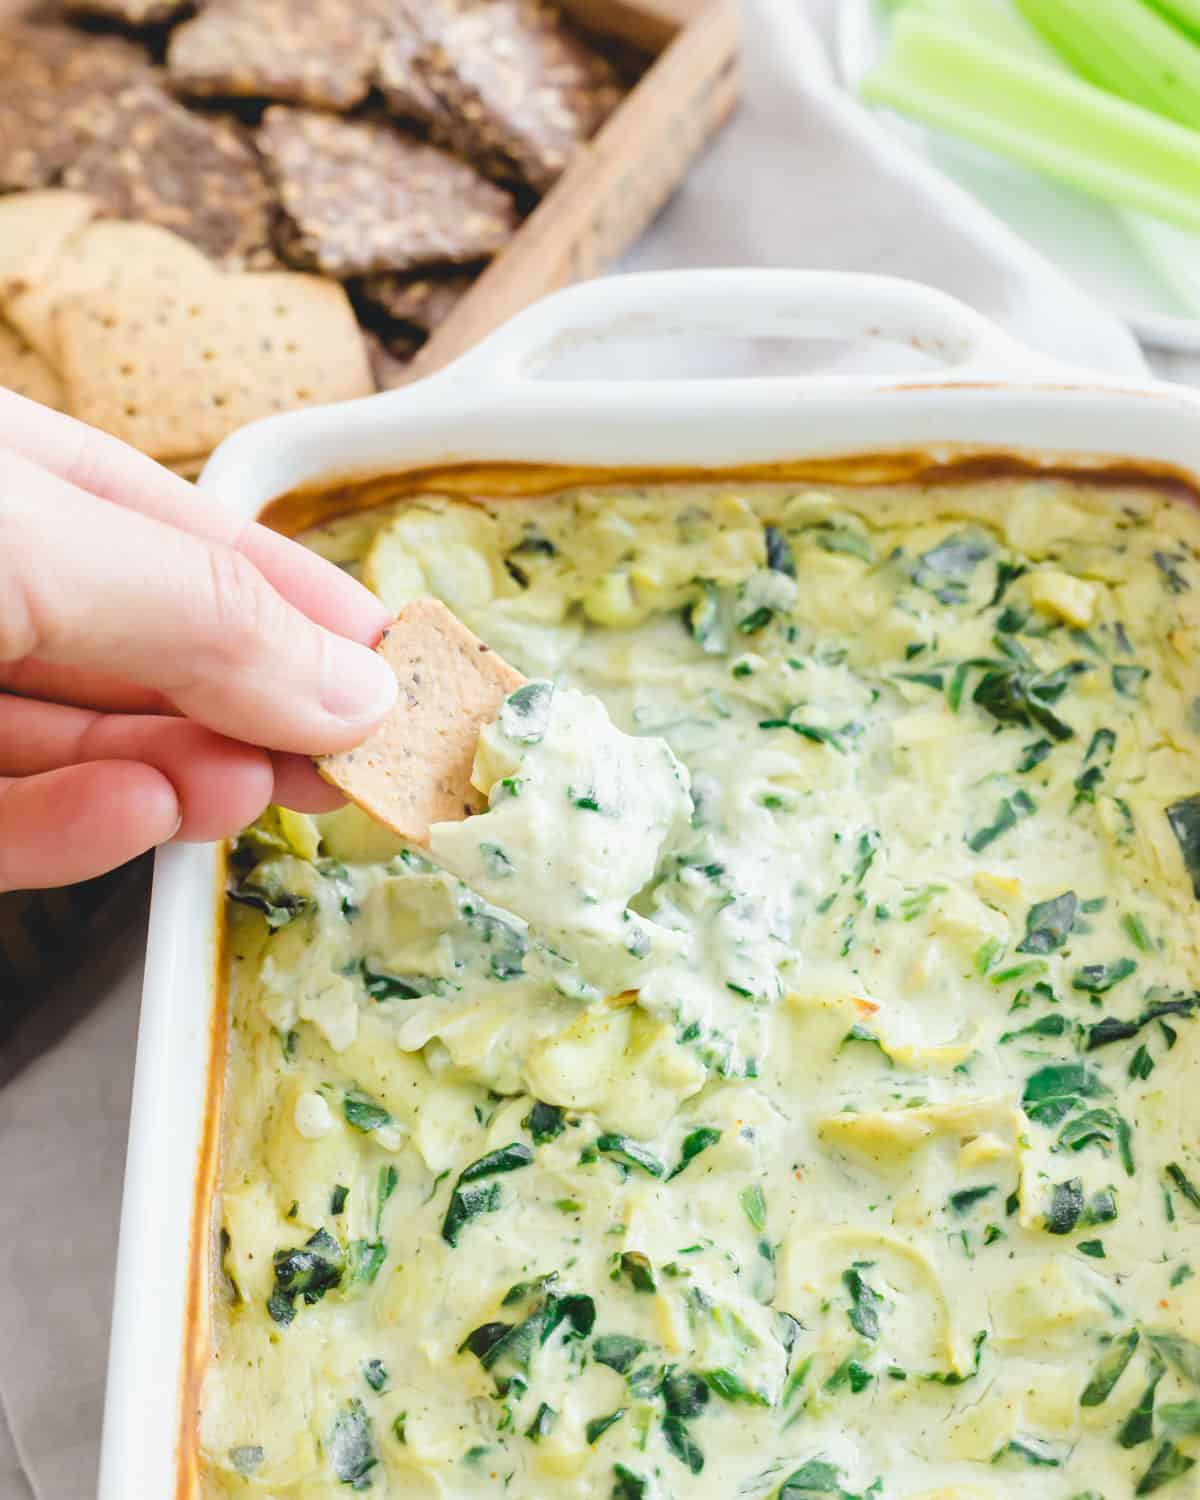 Vegan spinach artichoke dip in a baking dish with crackers.